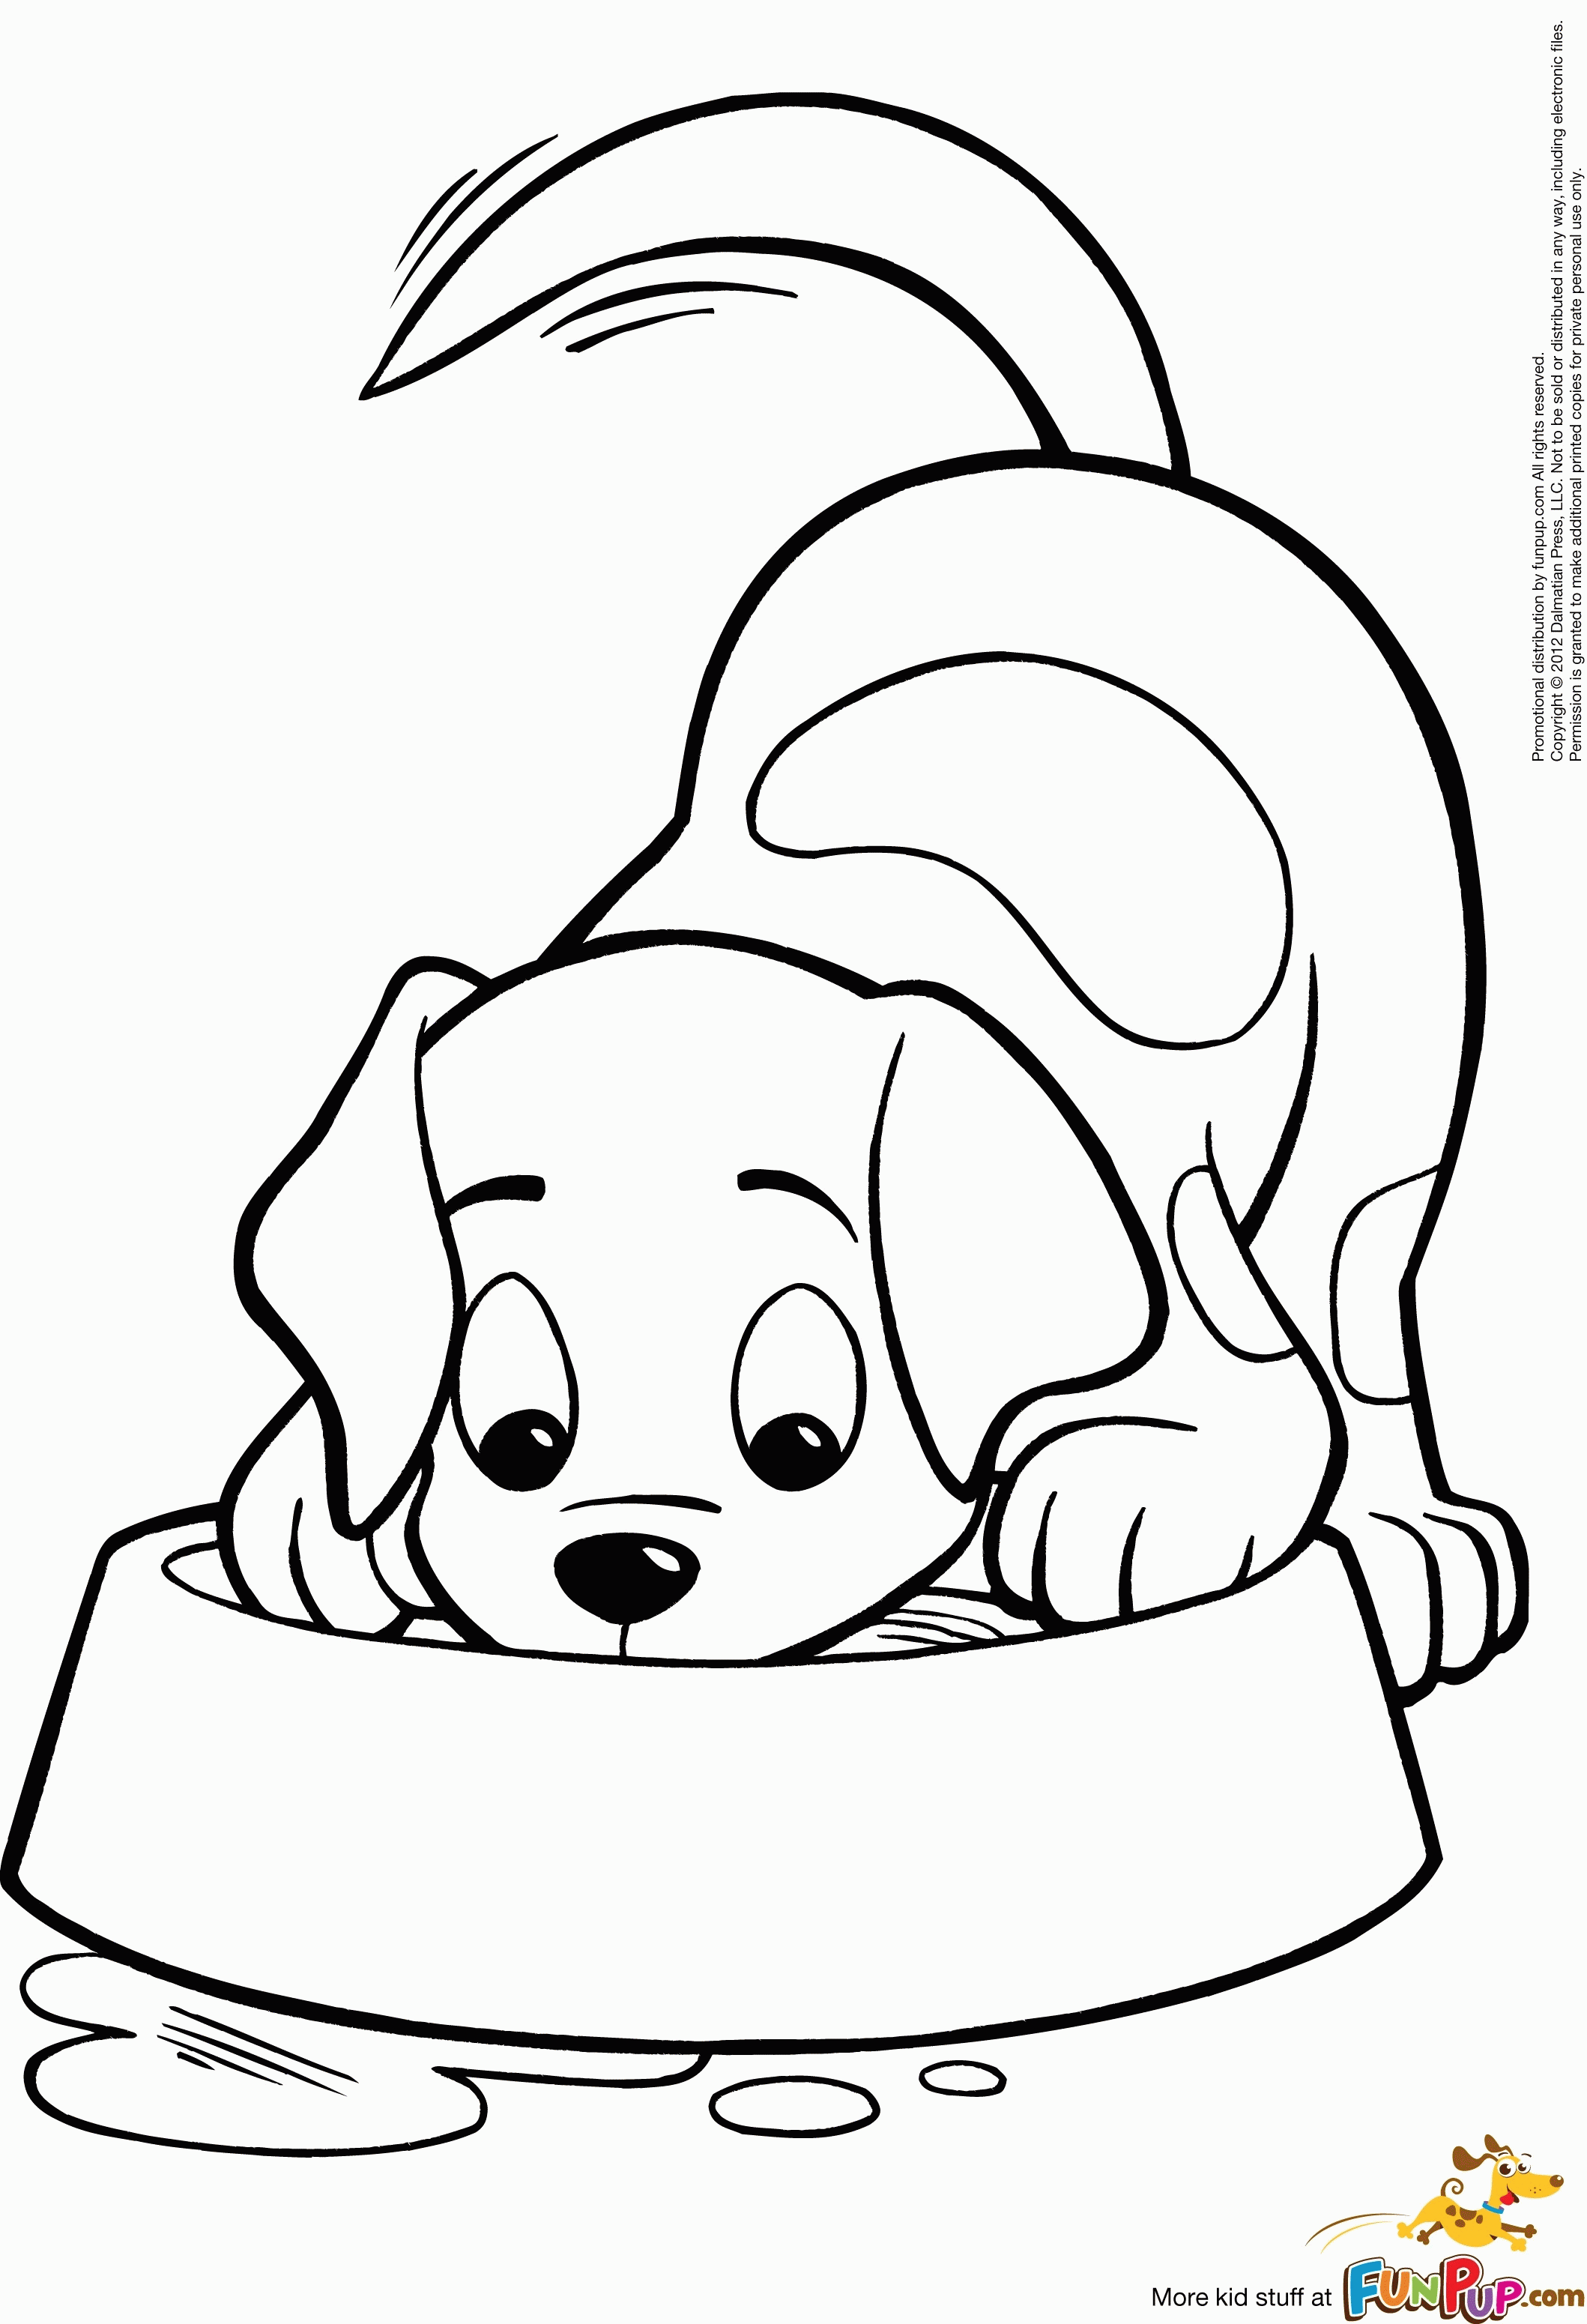 Puppy Colouring Pages Online Puppy Coloring Page Puppy ...